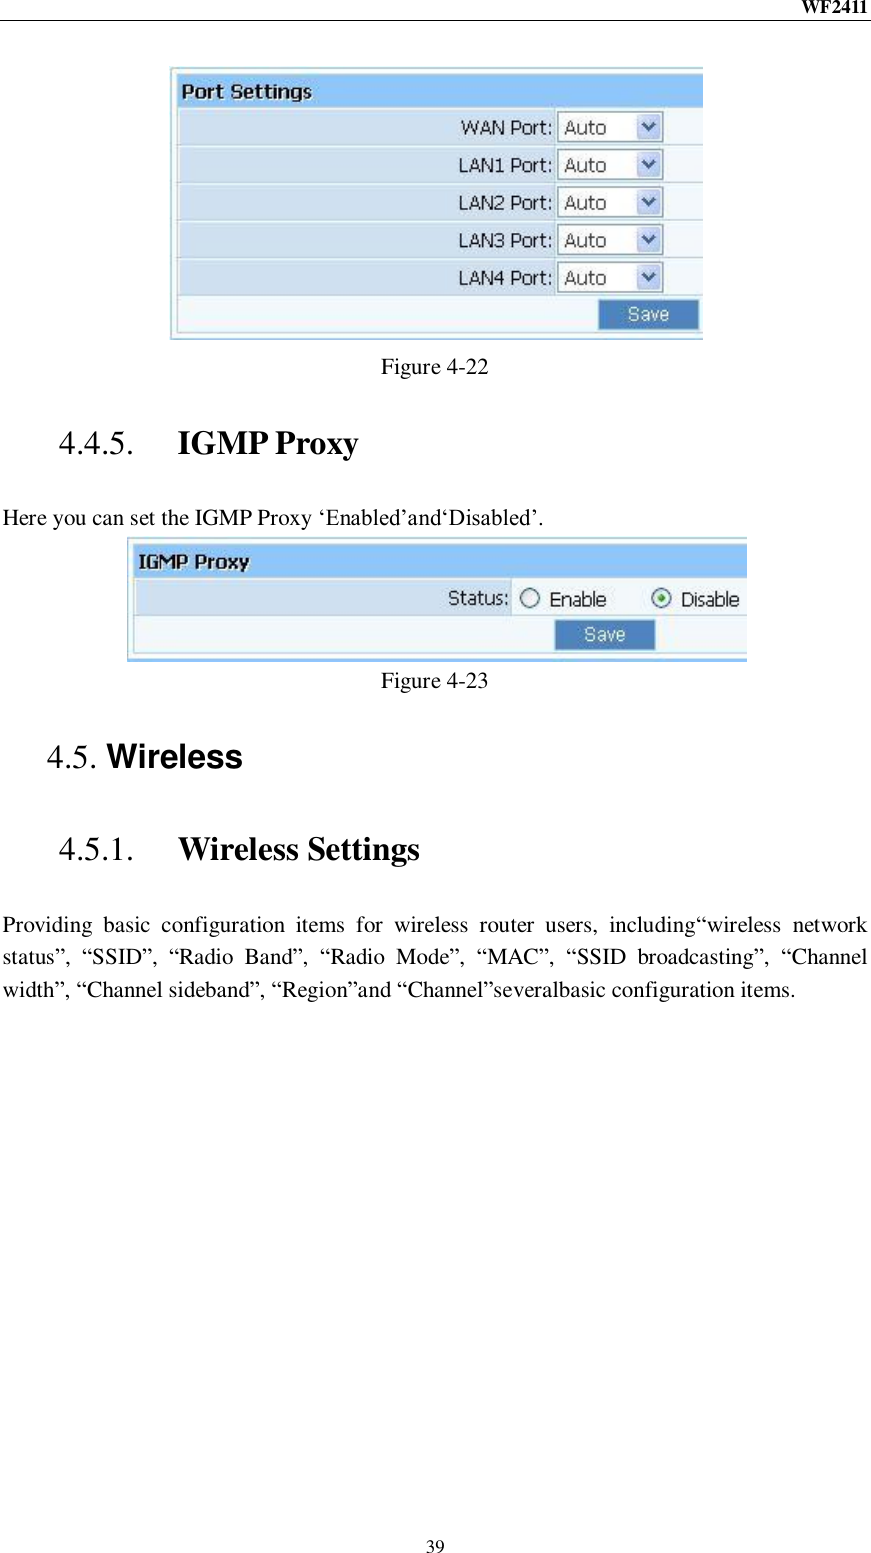 WF2411  39  Figure 4-22 4.4.5. IGMP Proxy Here you can set the IGMP Proxy „Enabled‟and„Disabled‟.  Figure 4-23 4.5. Wireless 4.5.1. Wireless Settings Providing  basic  configuration  items  for  wireless  router  users,  including“wireless  network status”,  “SSID”,  “Radio  Band”,  “Radio  Mode”,  “MAC”,  “SSID  broadcasting”,  “Channel width”, “Channel sideband”, “Region”and “Channel”severalbasic configuration items. 